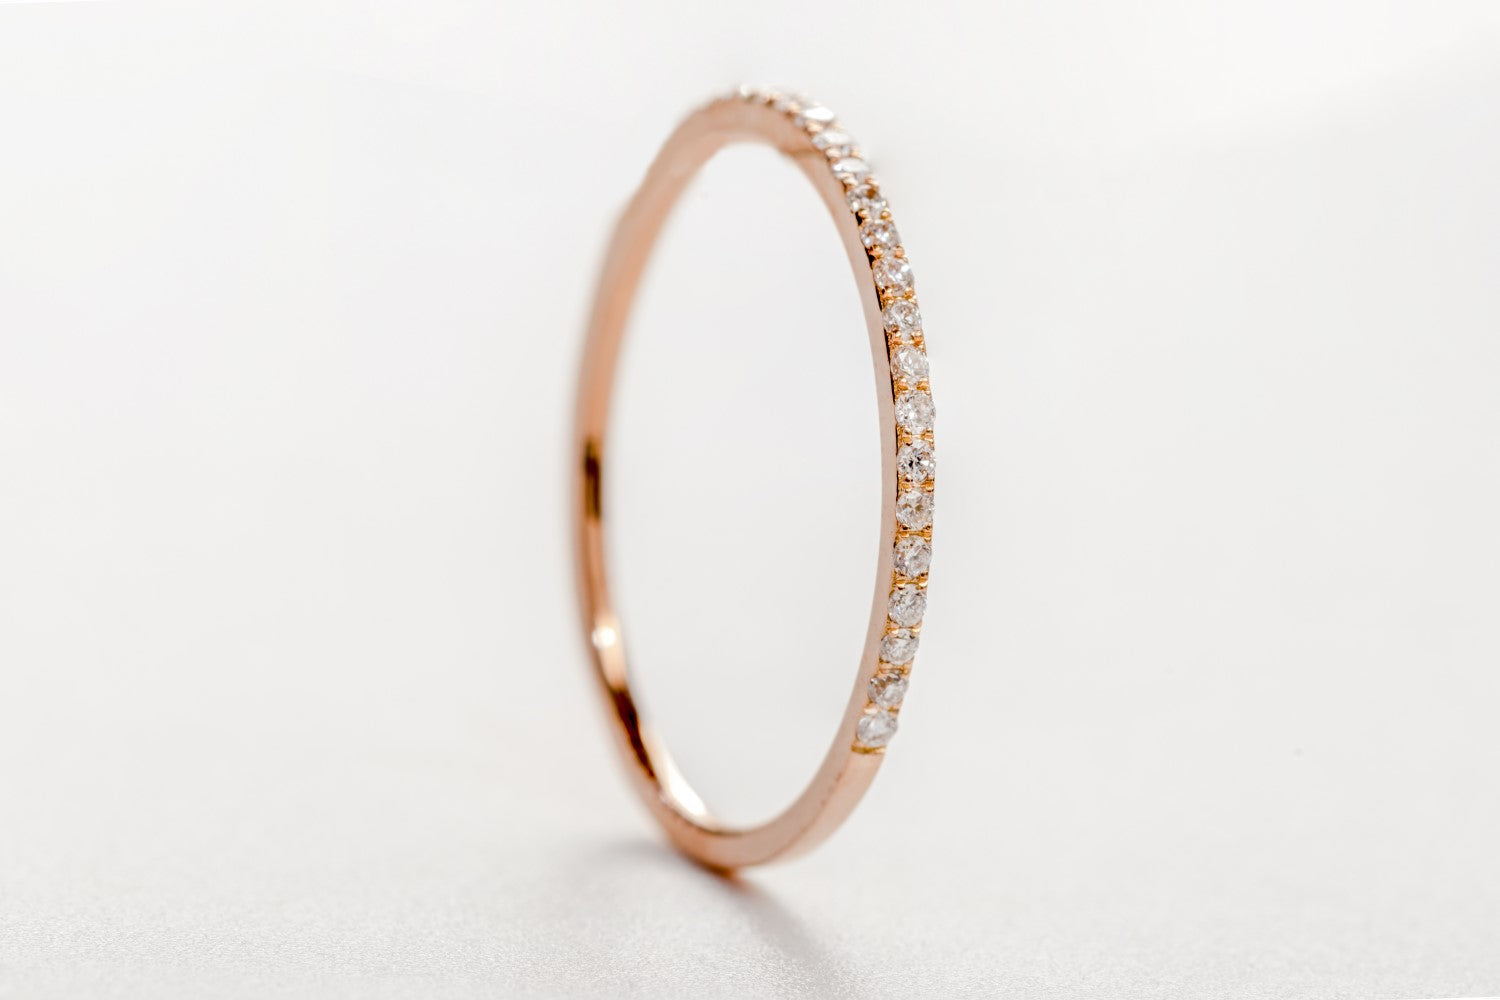 0.14tcw Diamond and 18ct Rose Gold Petite 1mm Half Eternity Band Ring US 6.5